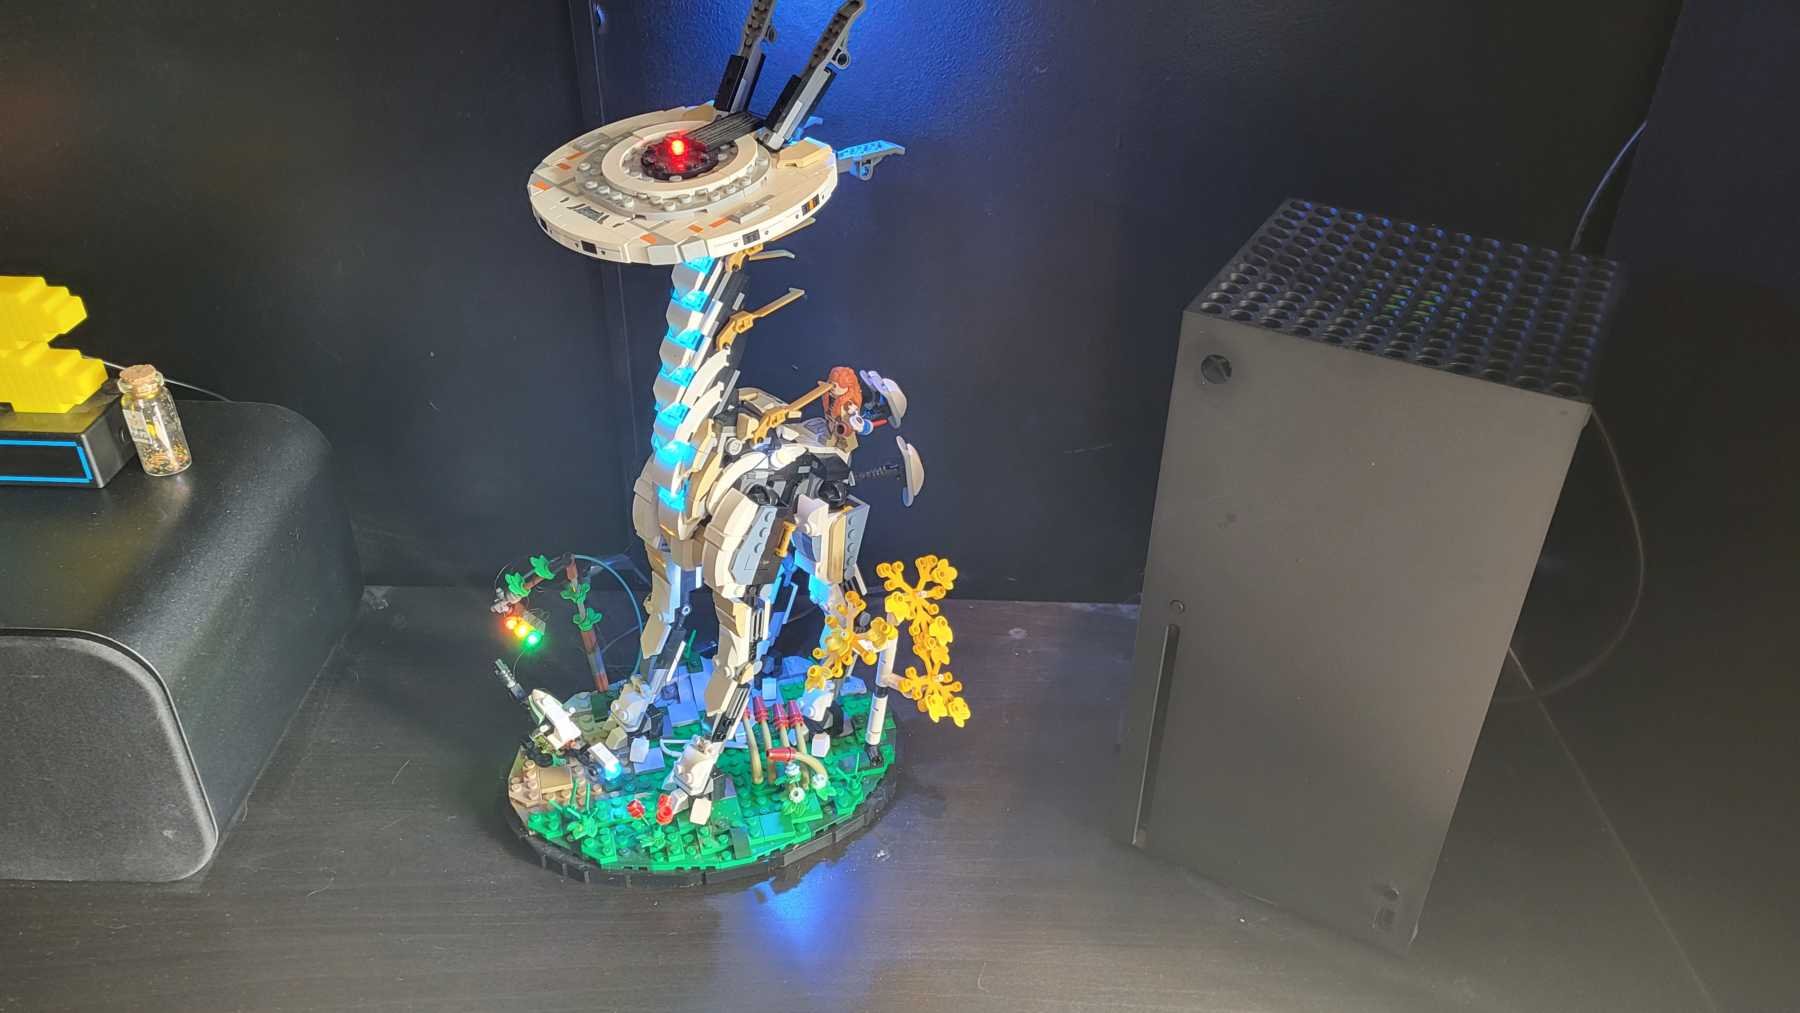 lego tallneck with LEDs